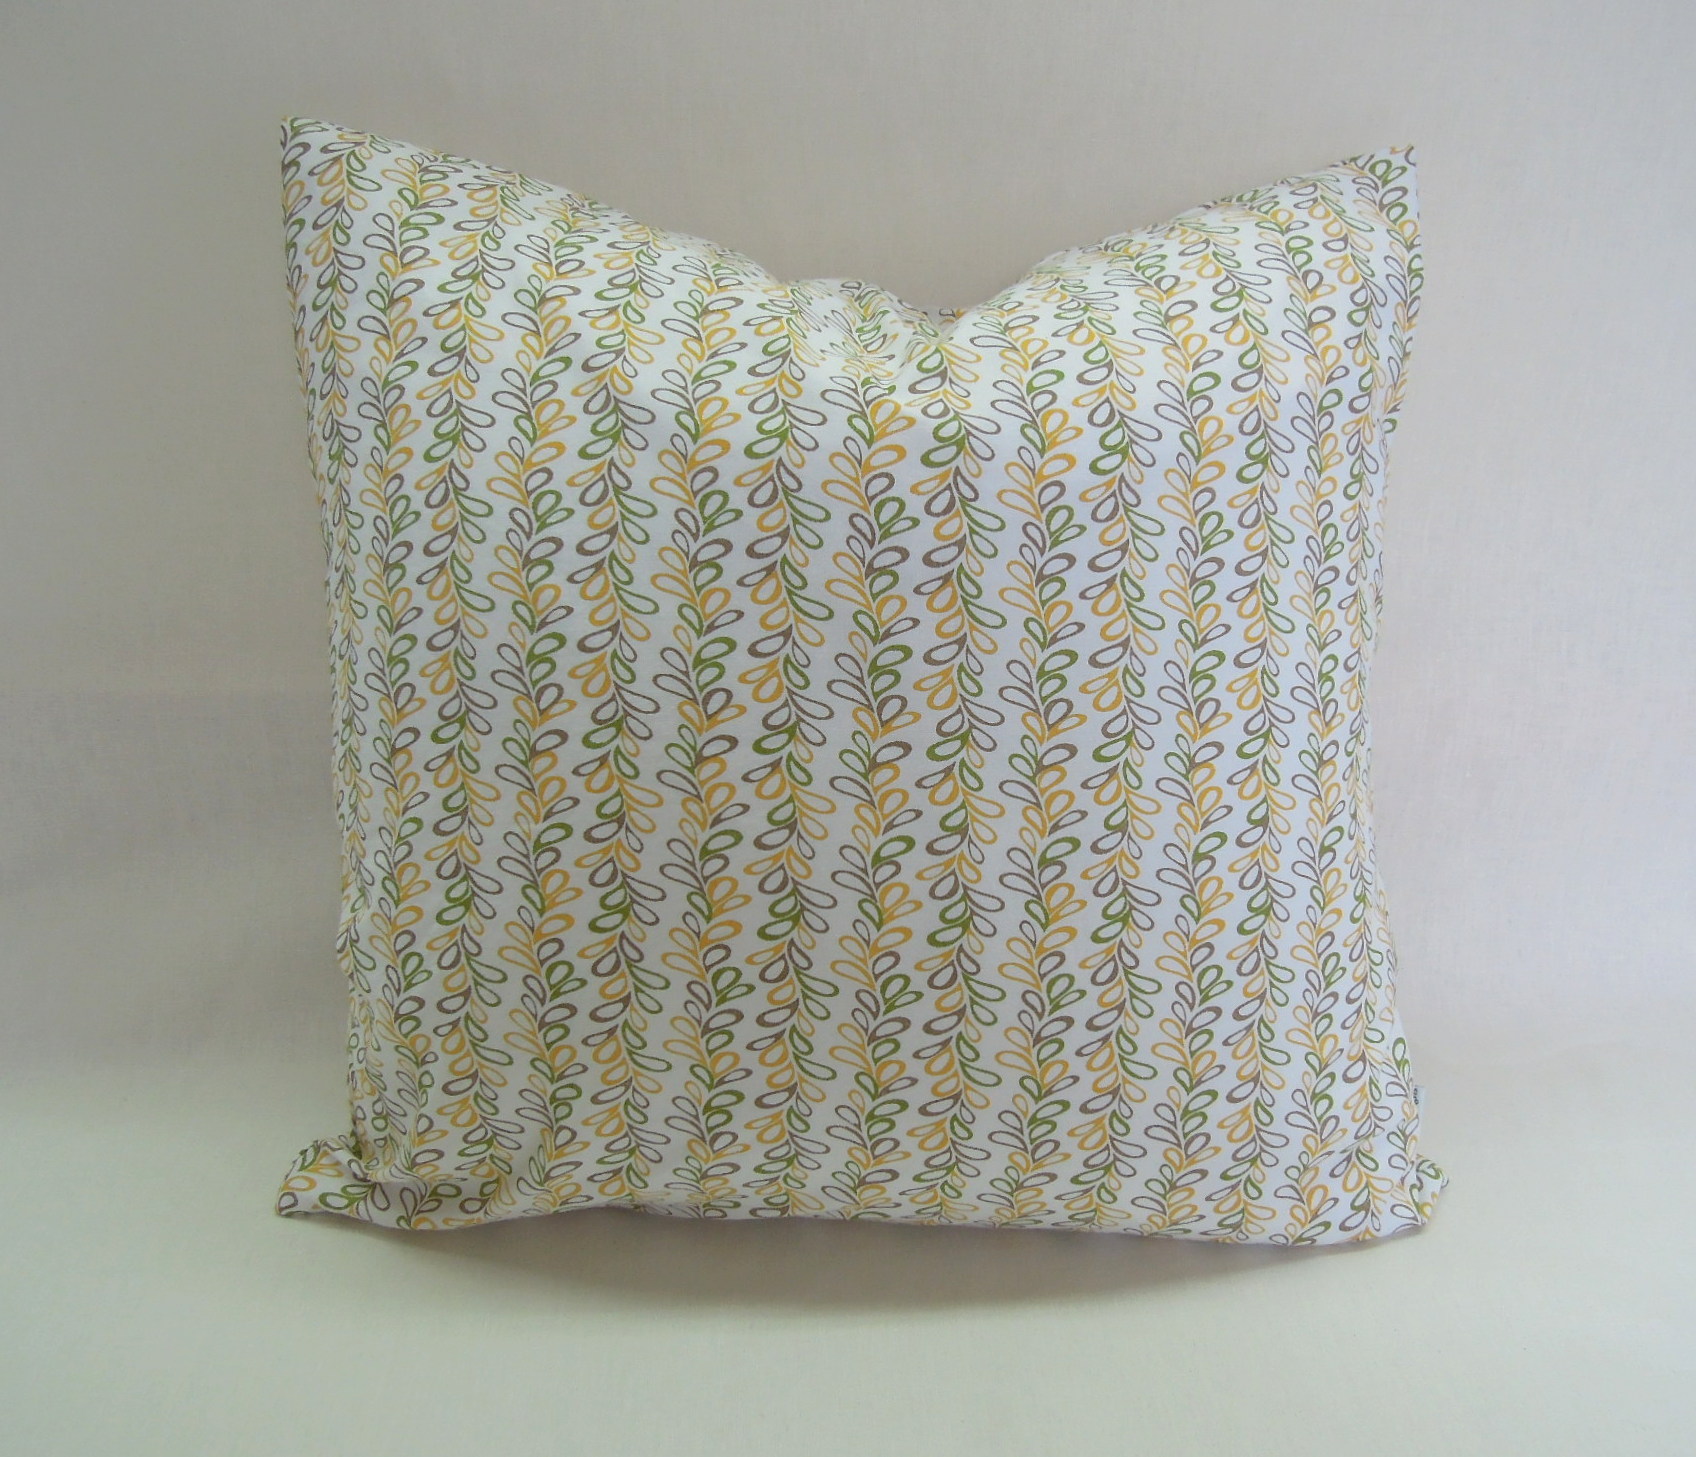 March 2015 Giveaway – Organic Cotton Pillow Cover